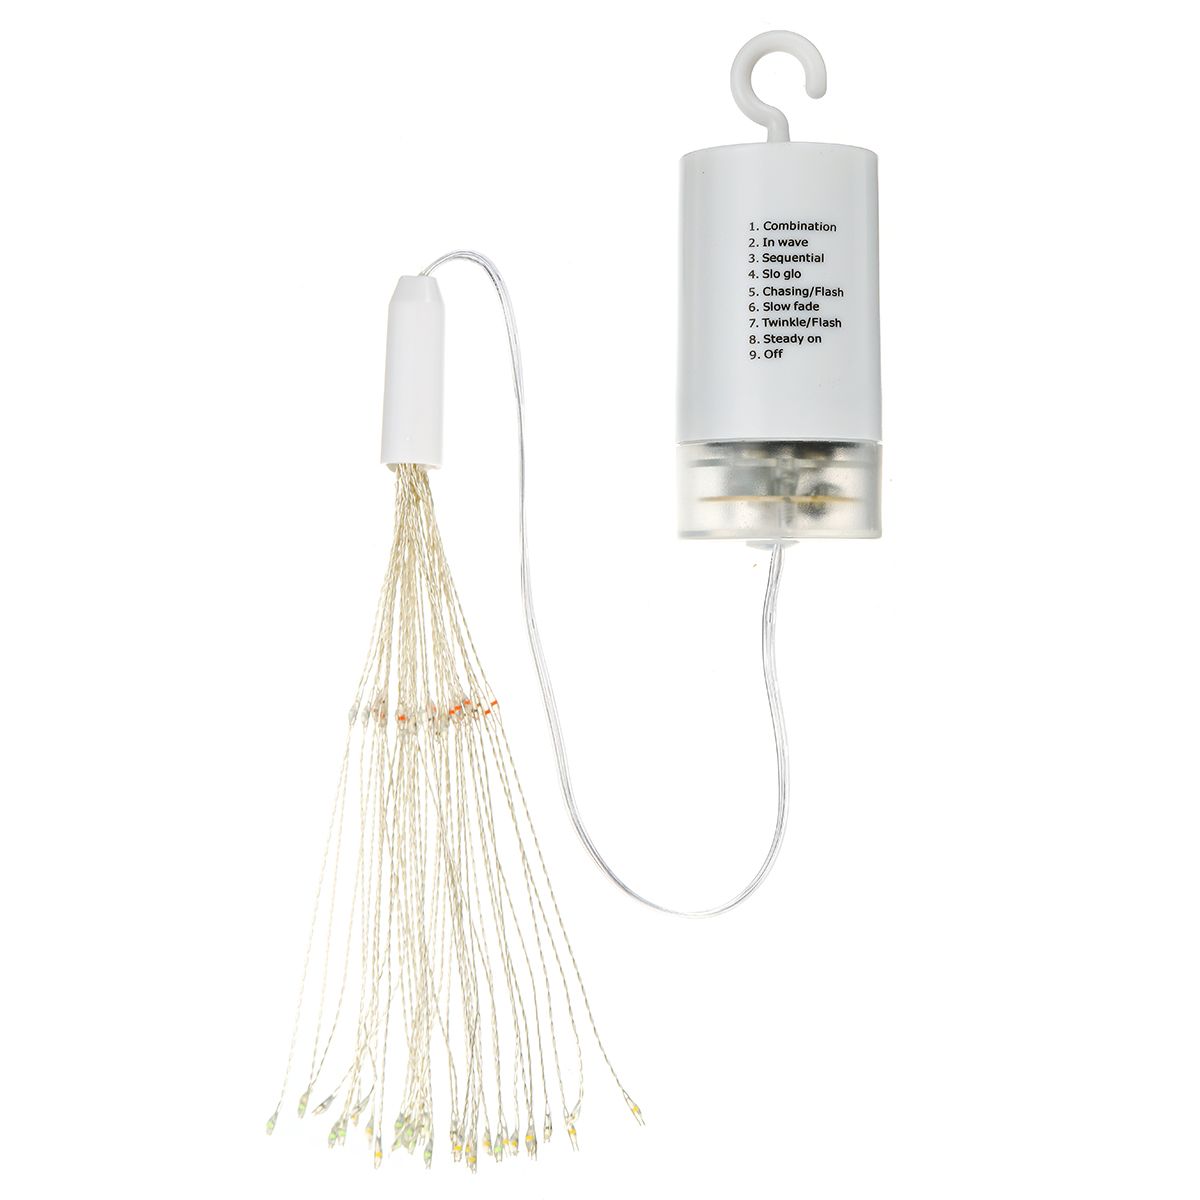 Hanging-LED-Firework-Fairy-String-Light-8Modes-Remote-Home-Party-Wedding-Decor-1691619